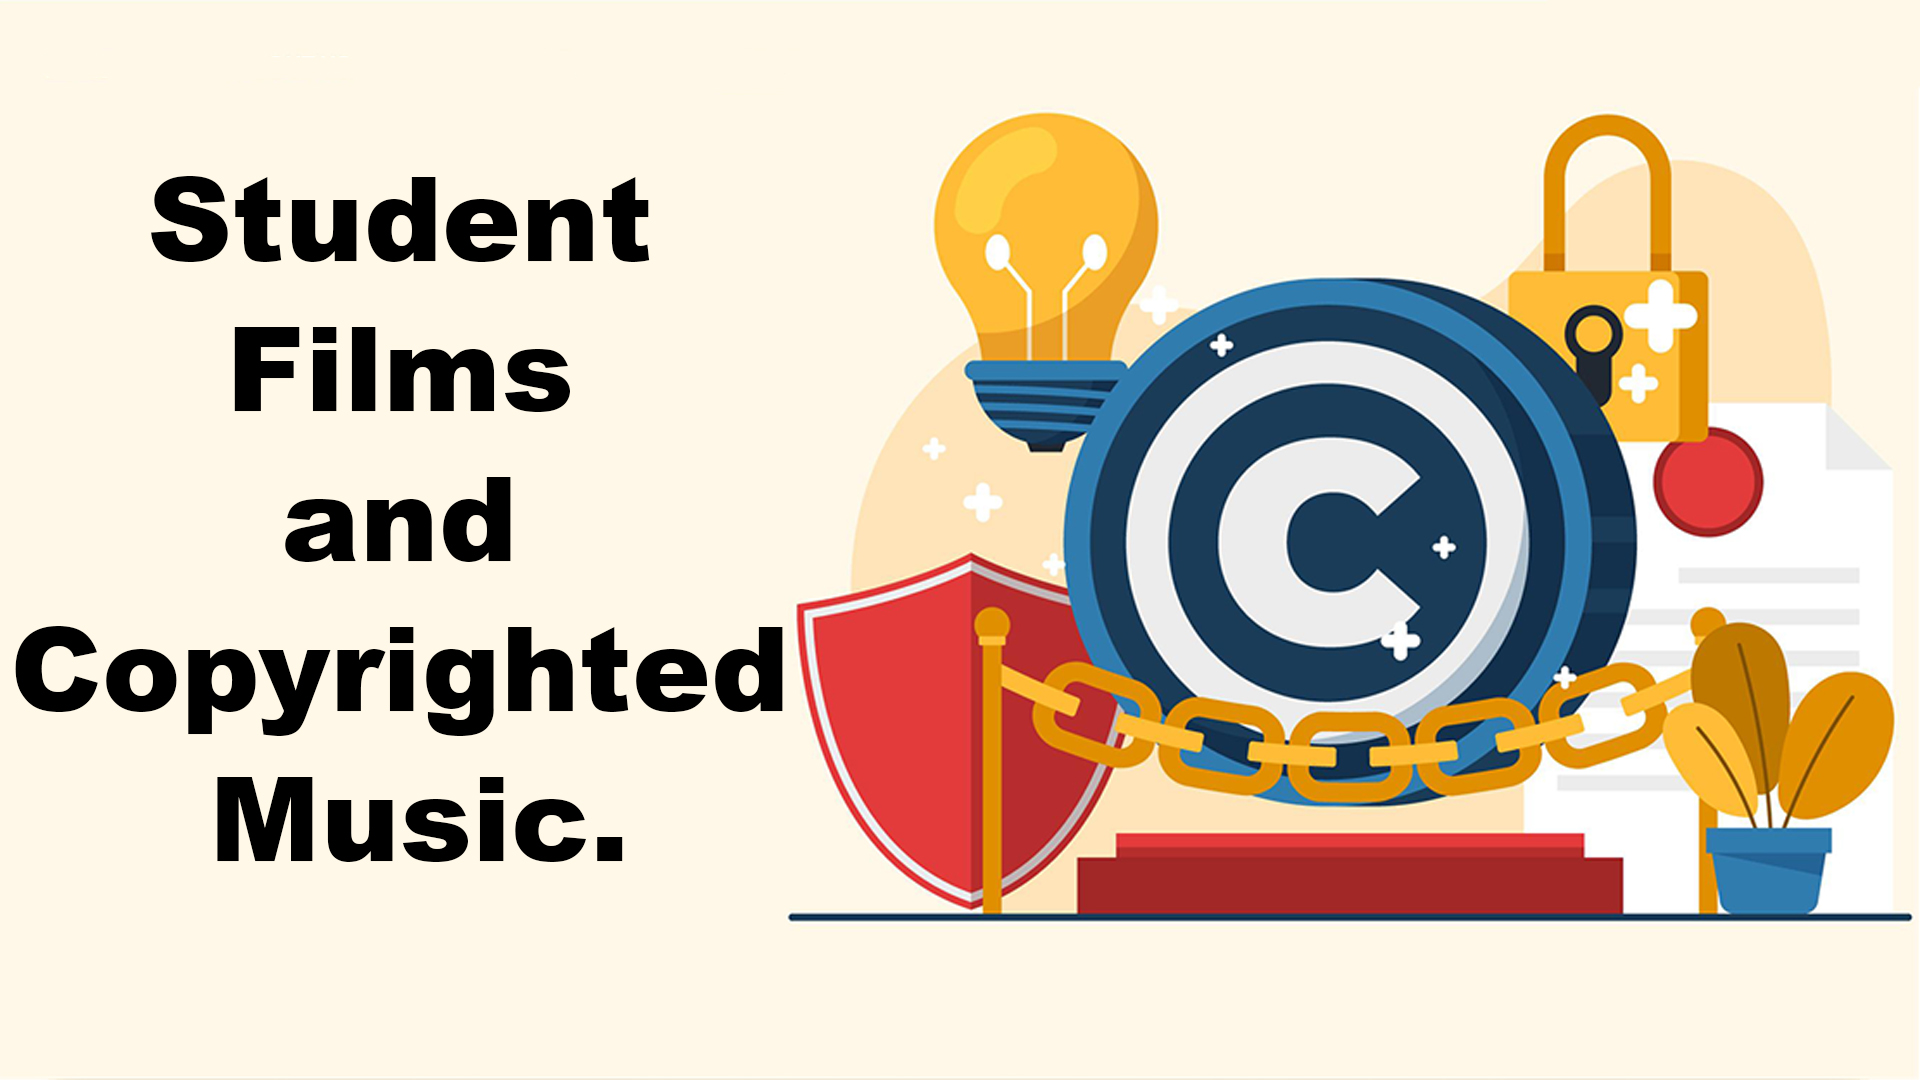 Copyrighted Music in Student’s Film: Legal or Illegal?